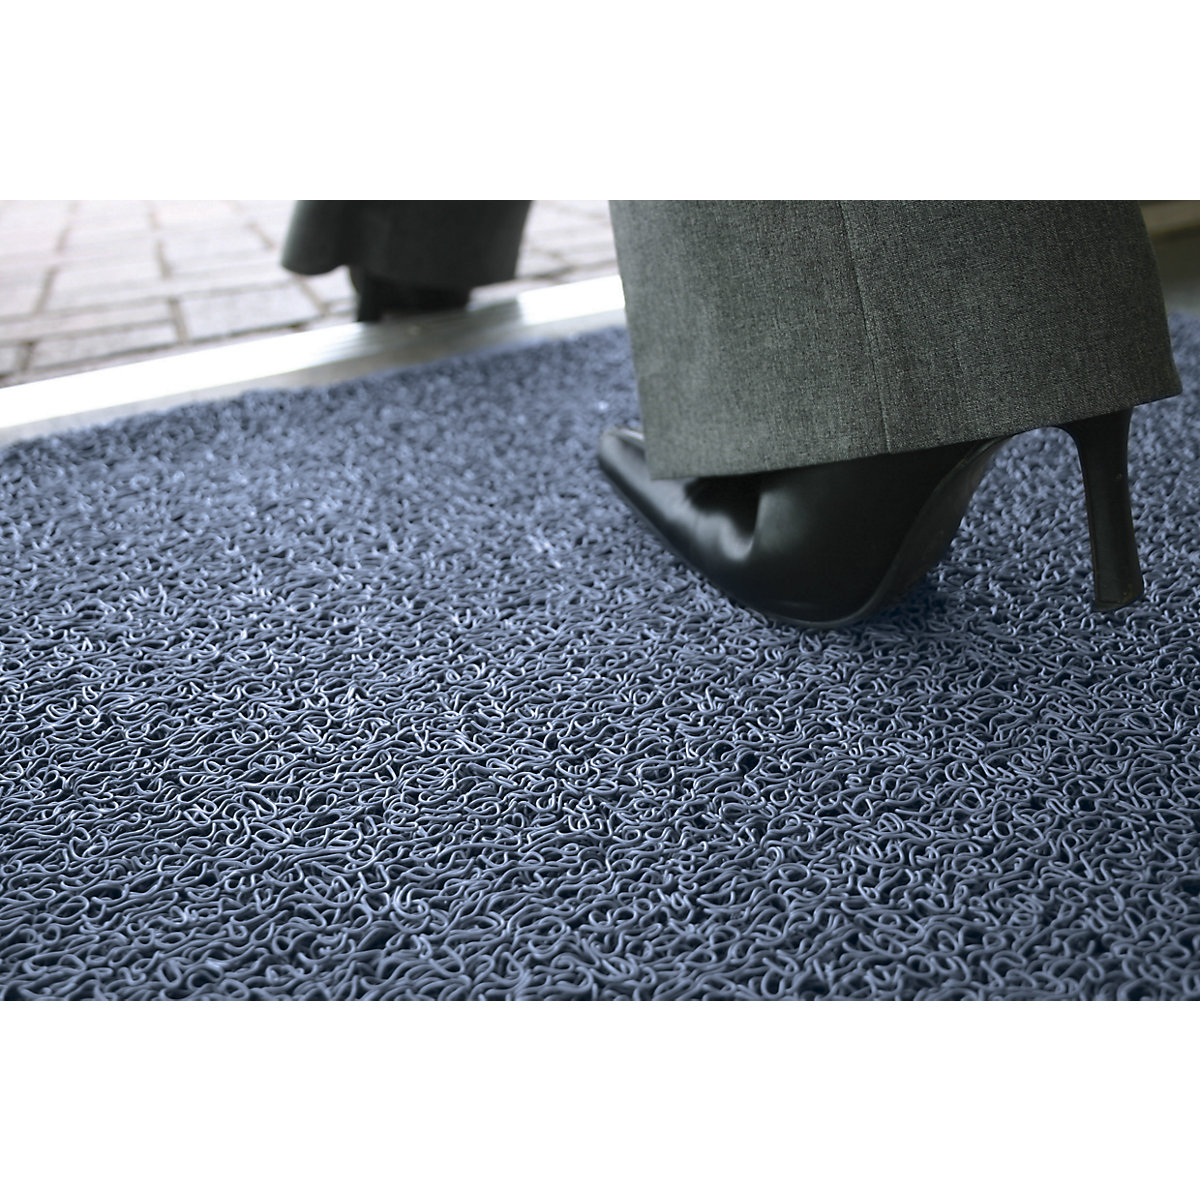 Entrance matting, flame resistant, width 1200 mm, sold by the metre, blue